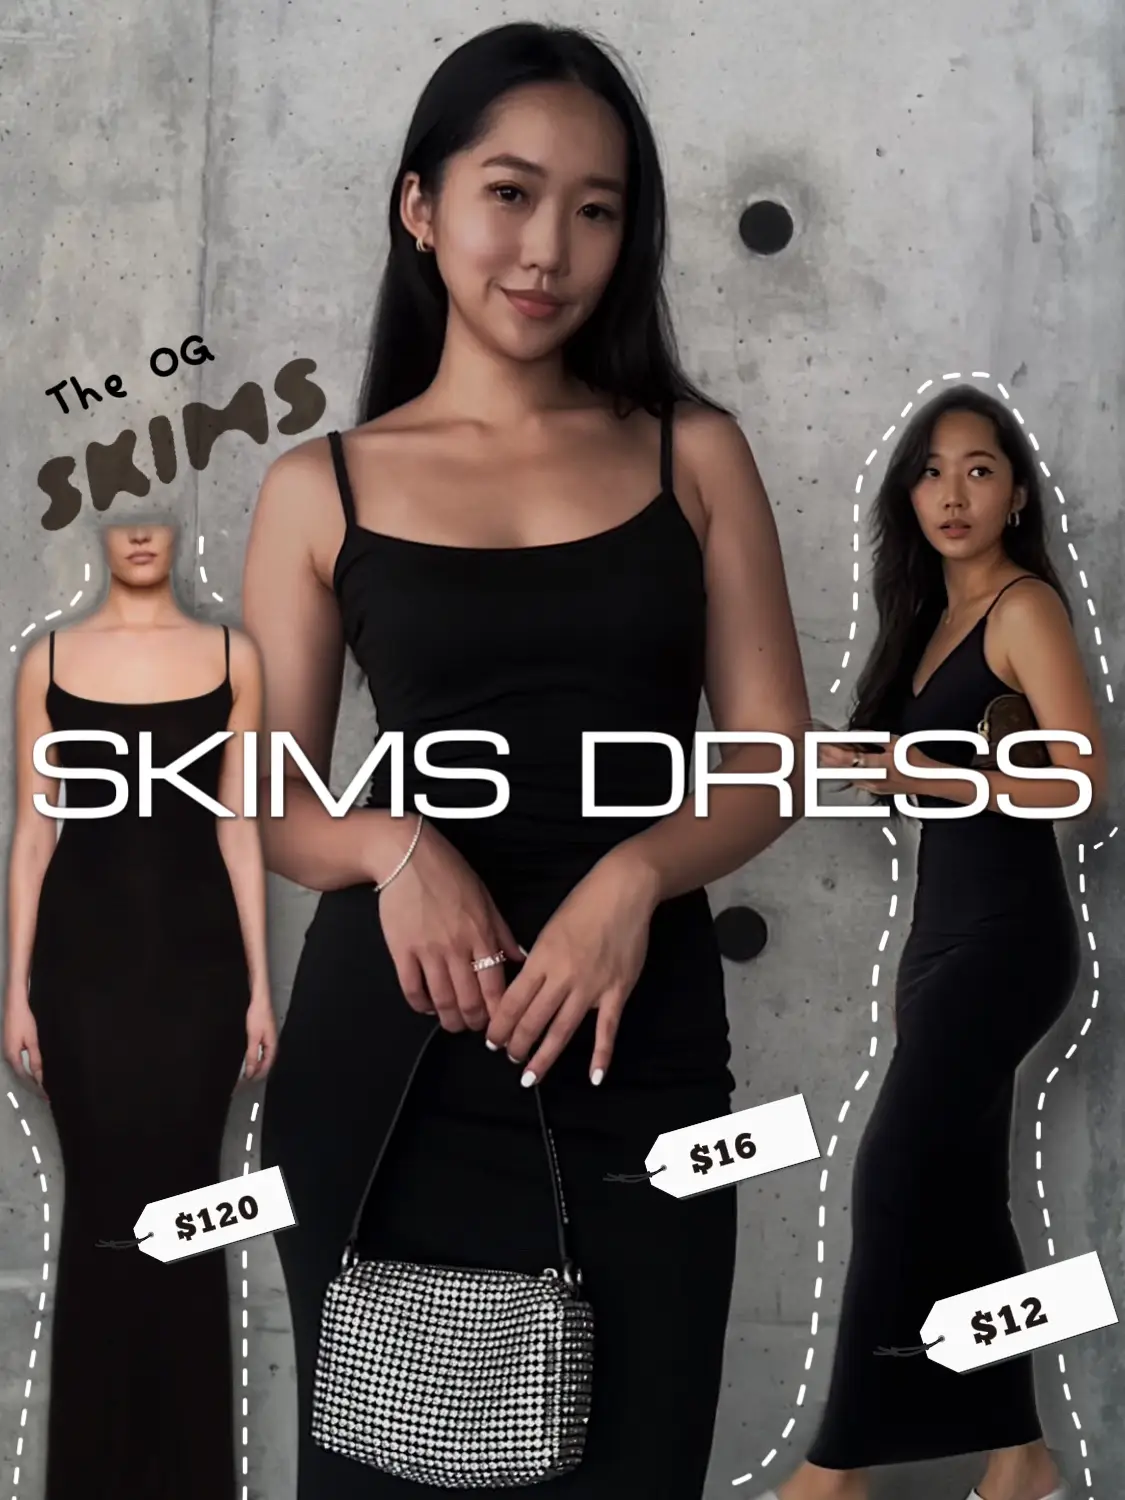 I found a dupe for the viral figure-hugging Skims dress - it cost